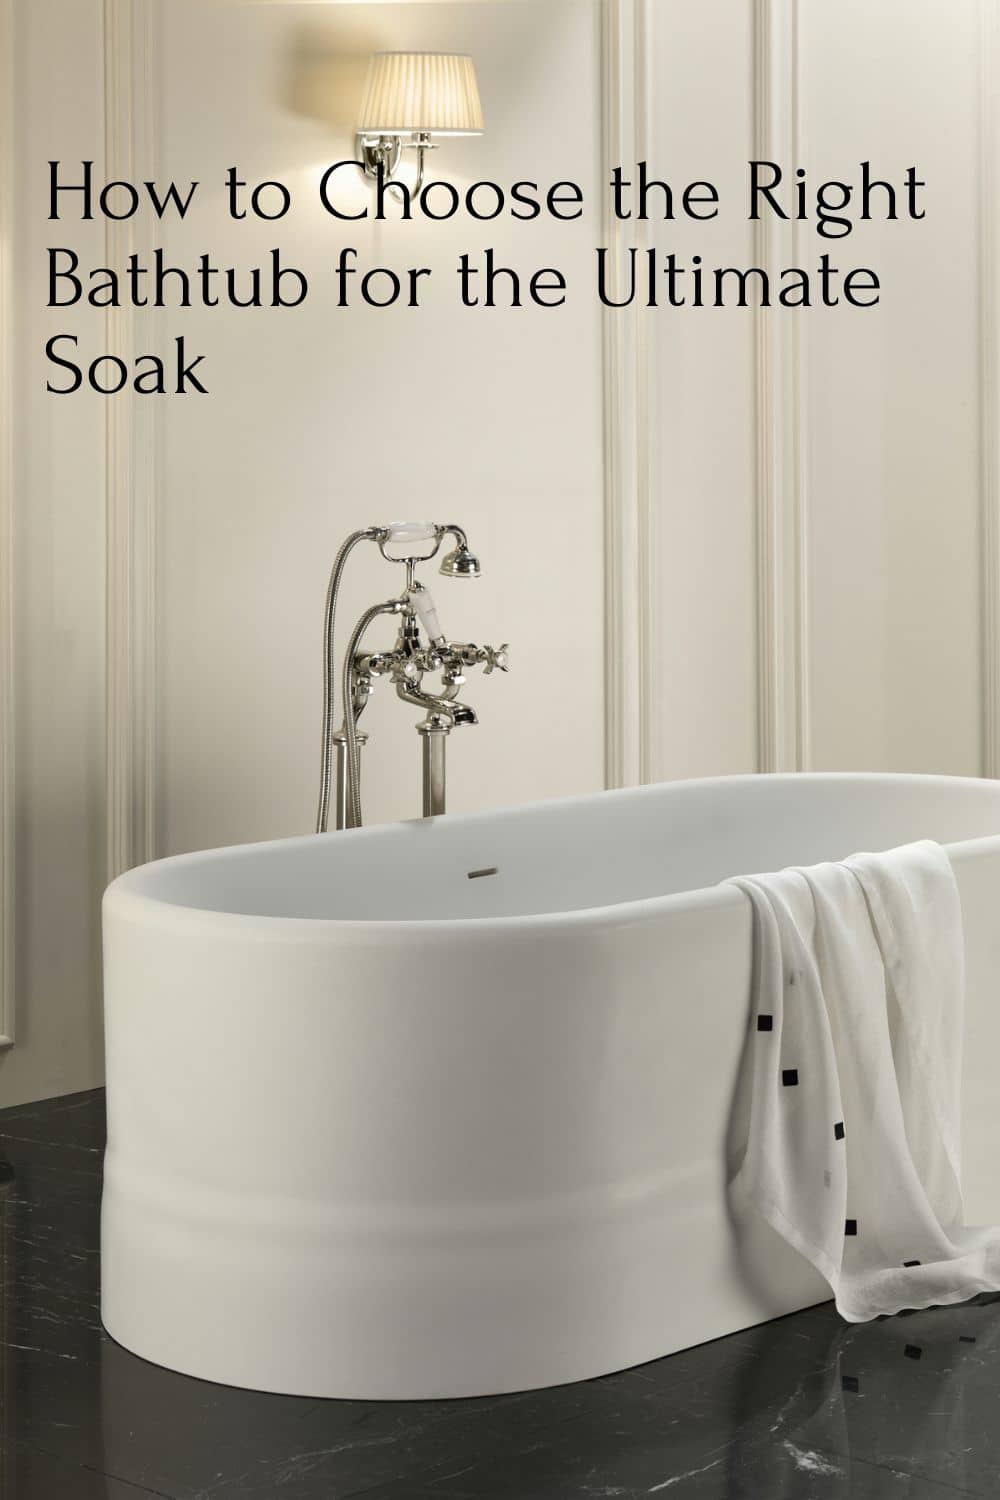 How to Choose the Right Bathtub for the Ultimate Soak - Bluehomediy